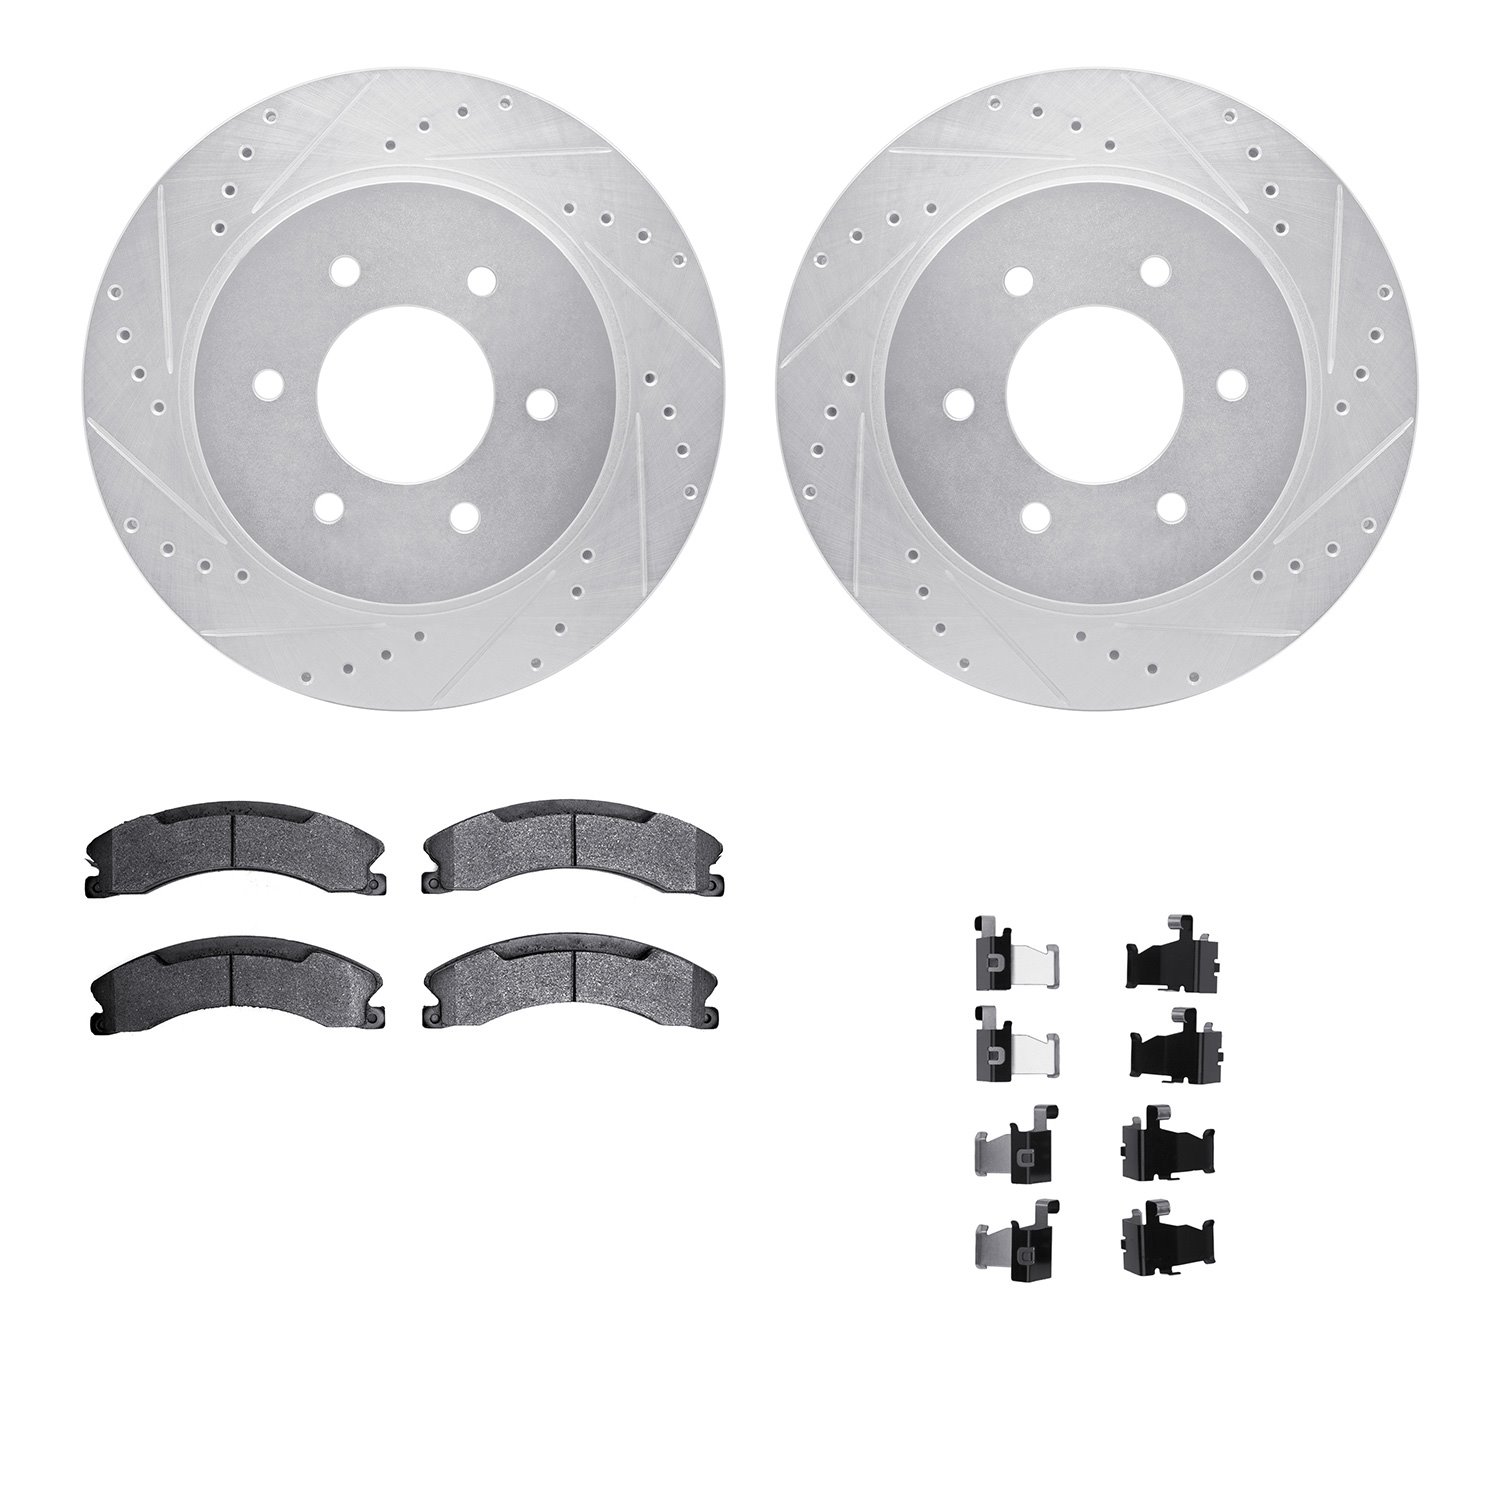 7512-67121 Drilled/Slotted Brake Rotors w/5000 Advanced Brake Pads Kit & Hardware [Silver], Fits Select Infiniti/Nissan, Positio